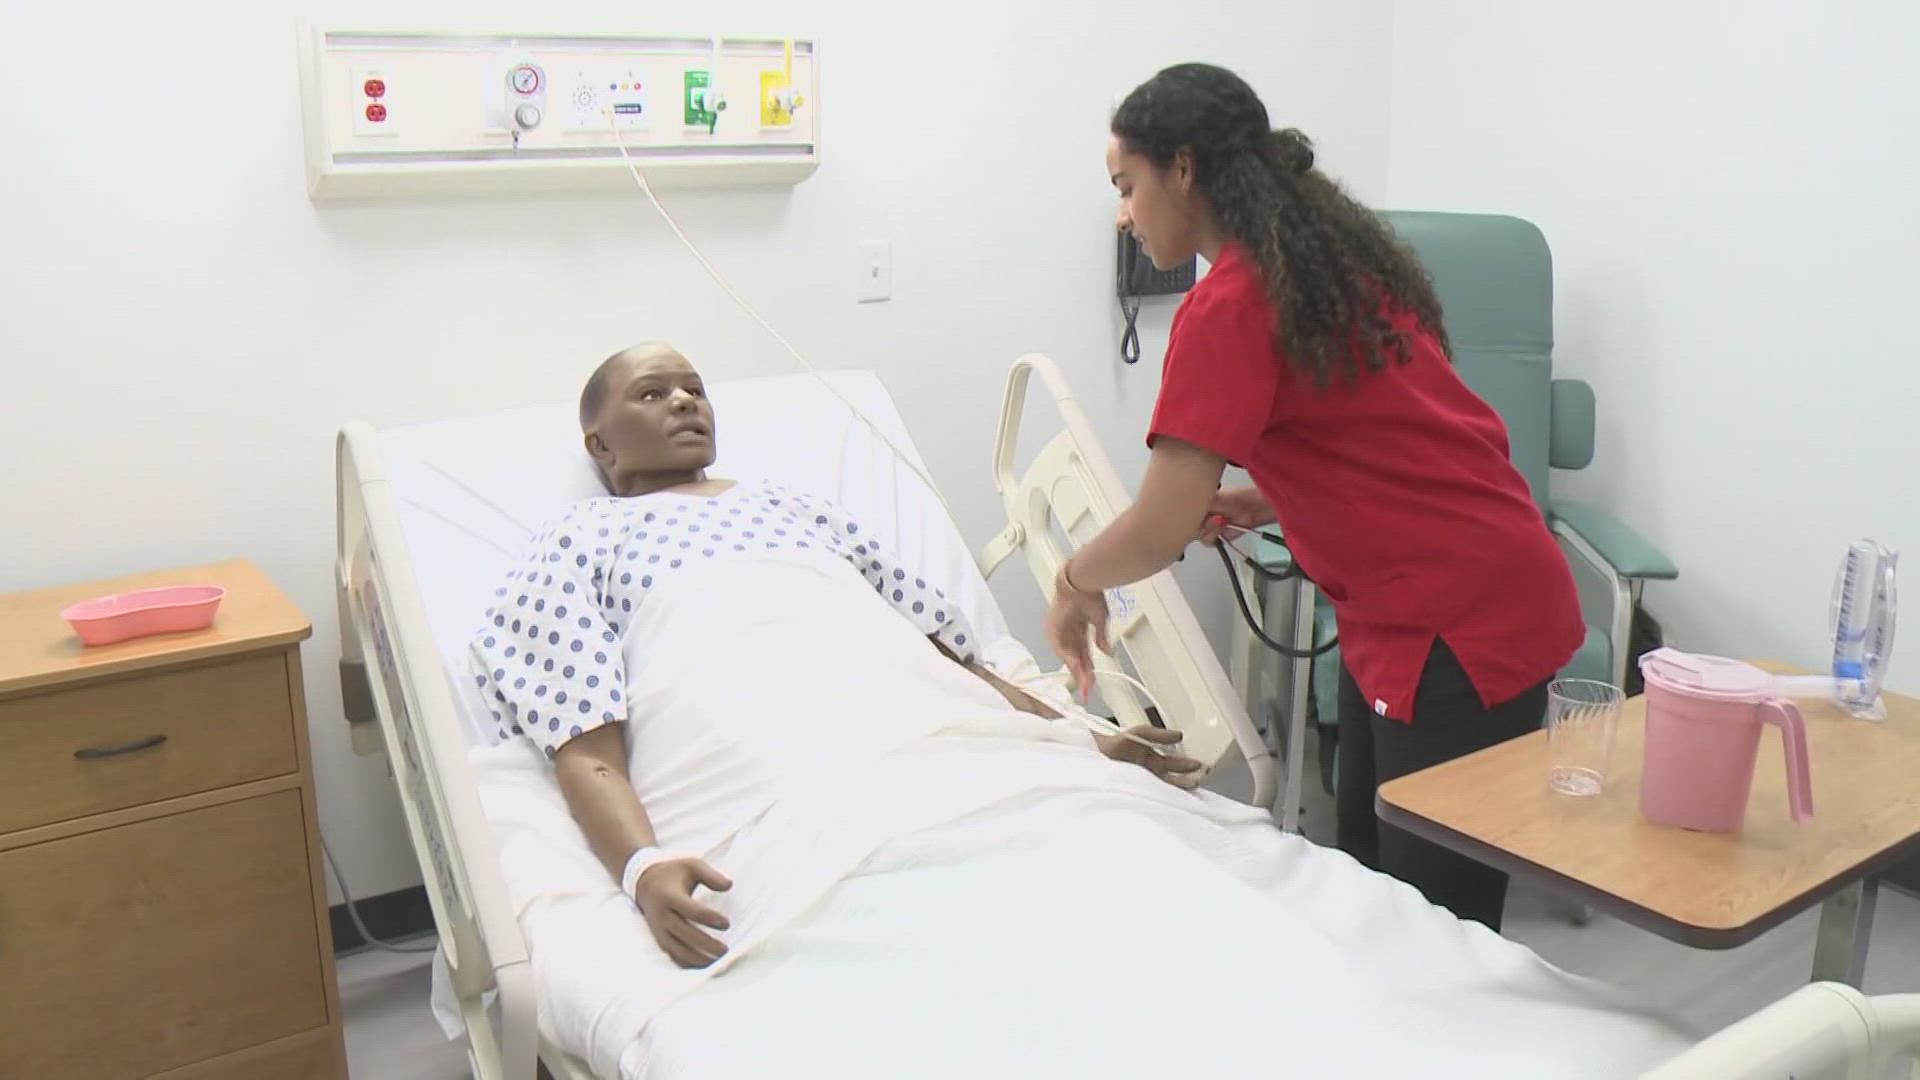 With a nursing shortage as a result of the pandemic, University of Hartford is helping combat this shortage.